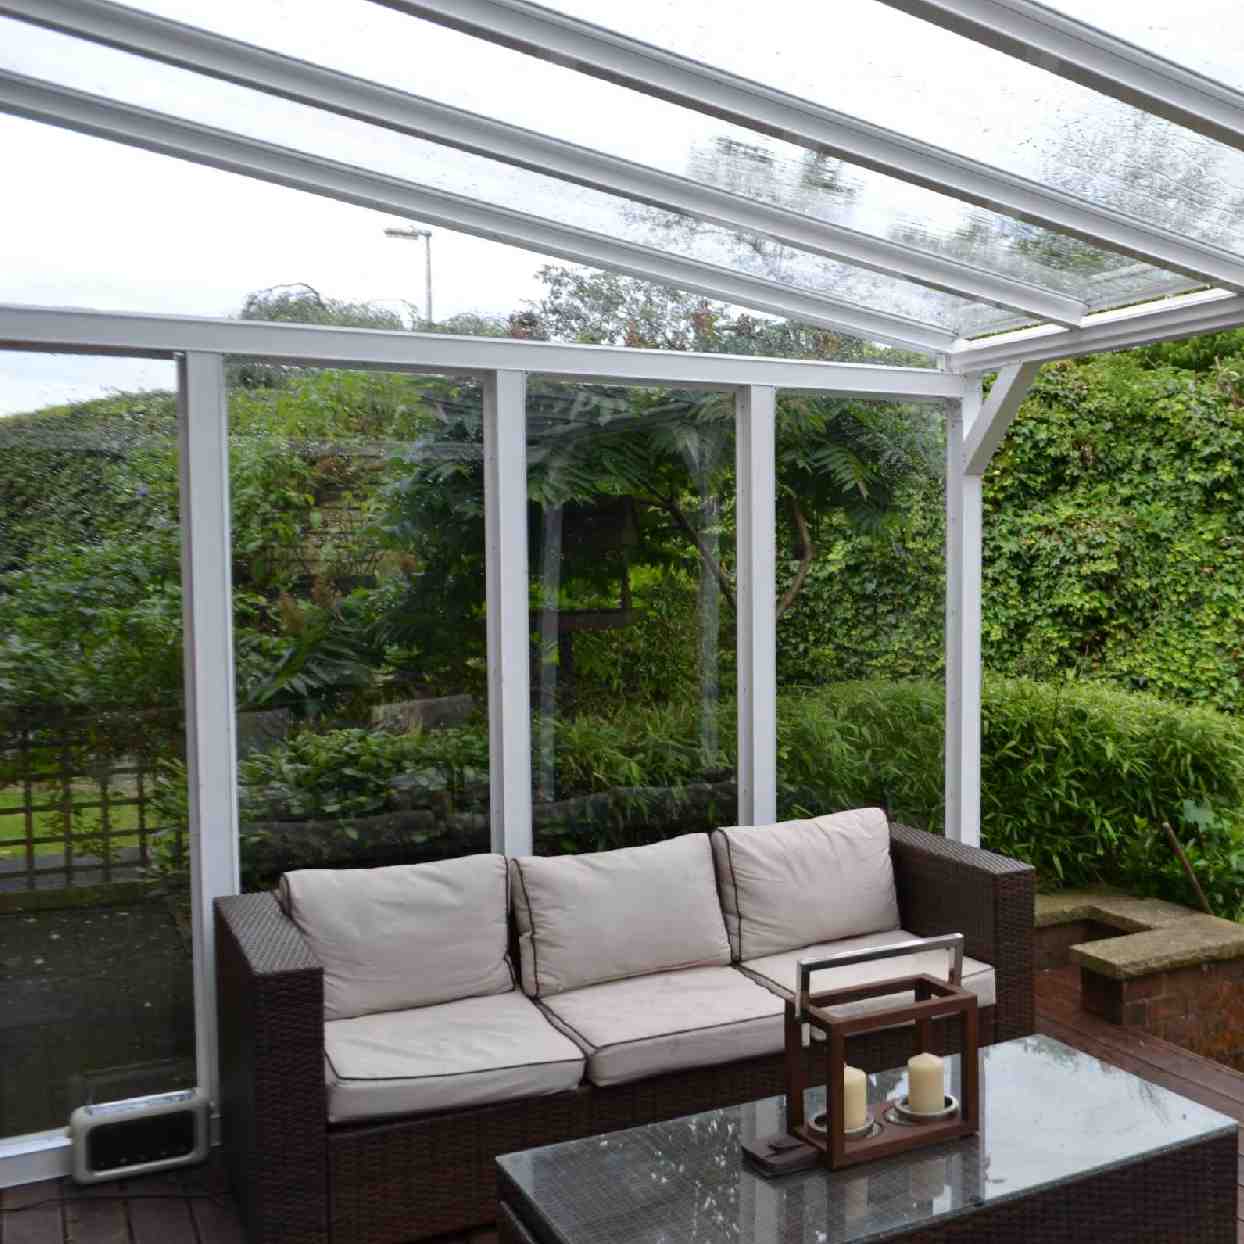 Buy Omega Verandah White with 16mm Polycarbonate Glazing - 9.9m (W) x 3.5m (P), (5) Supporting Posts online today